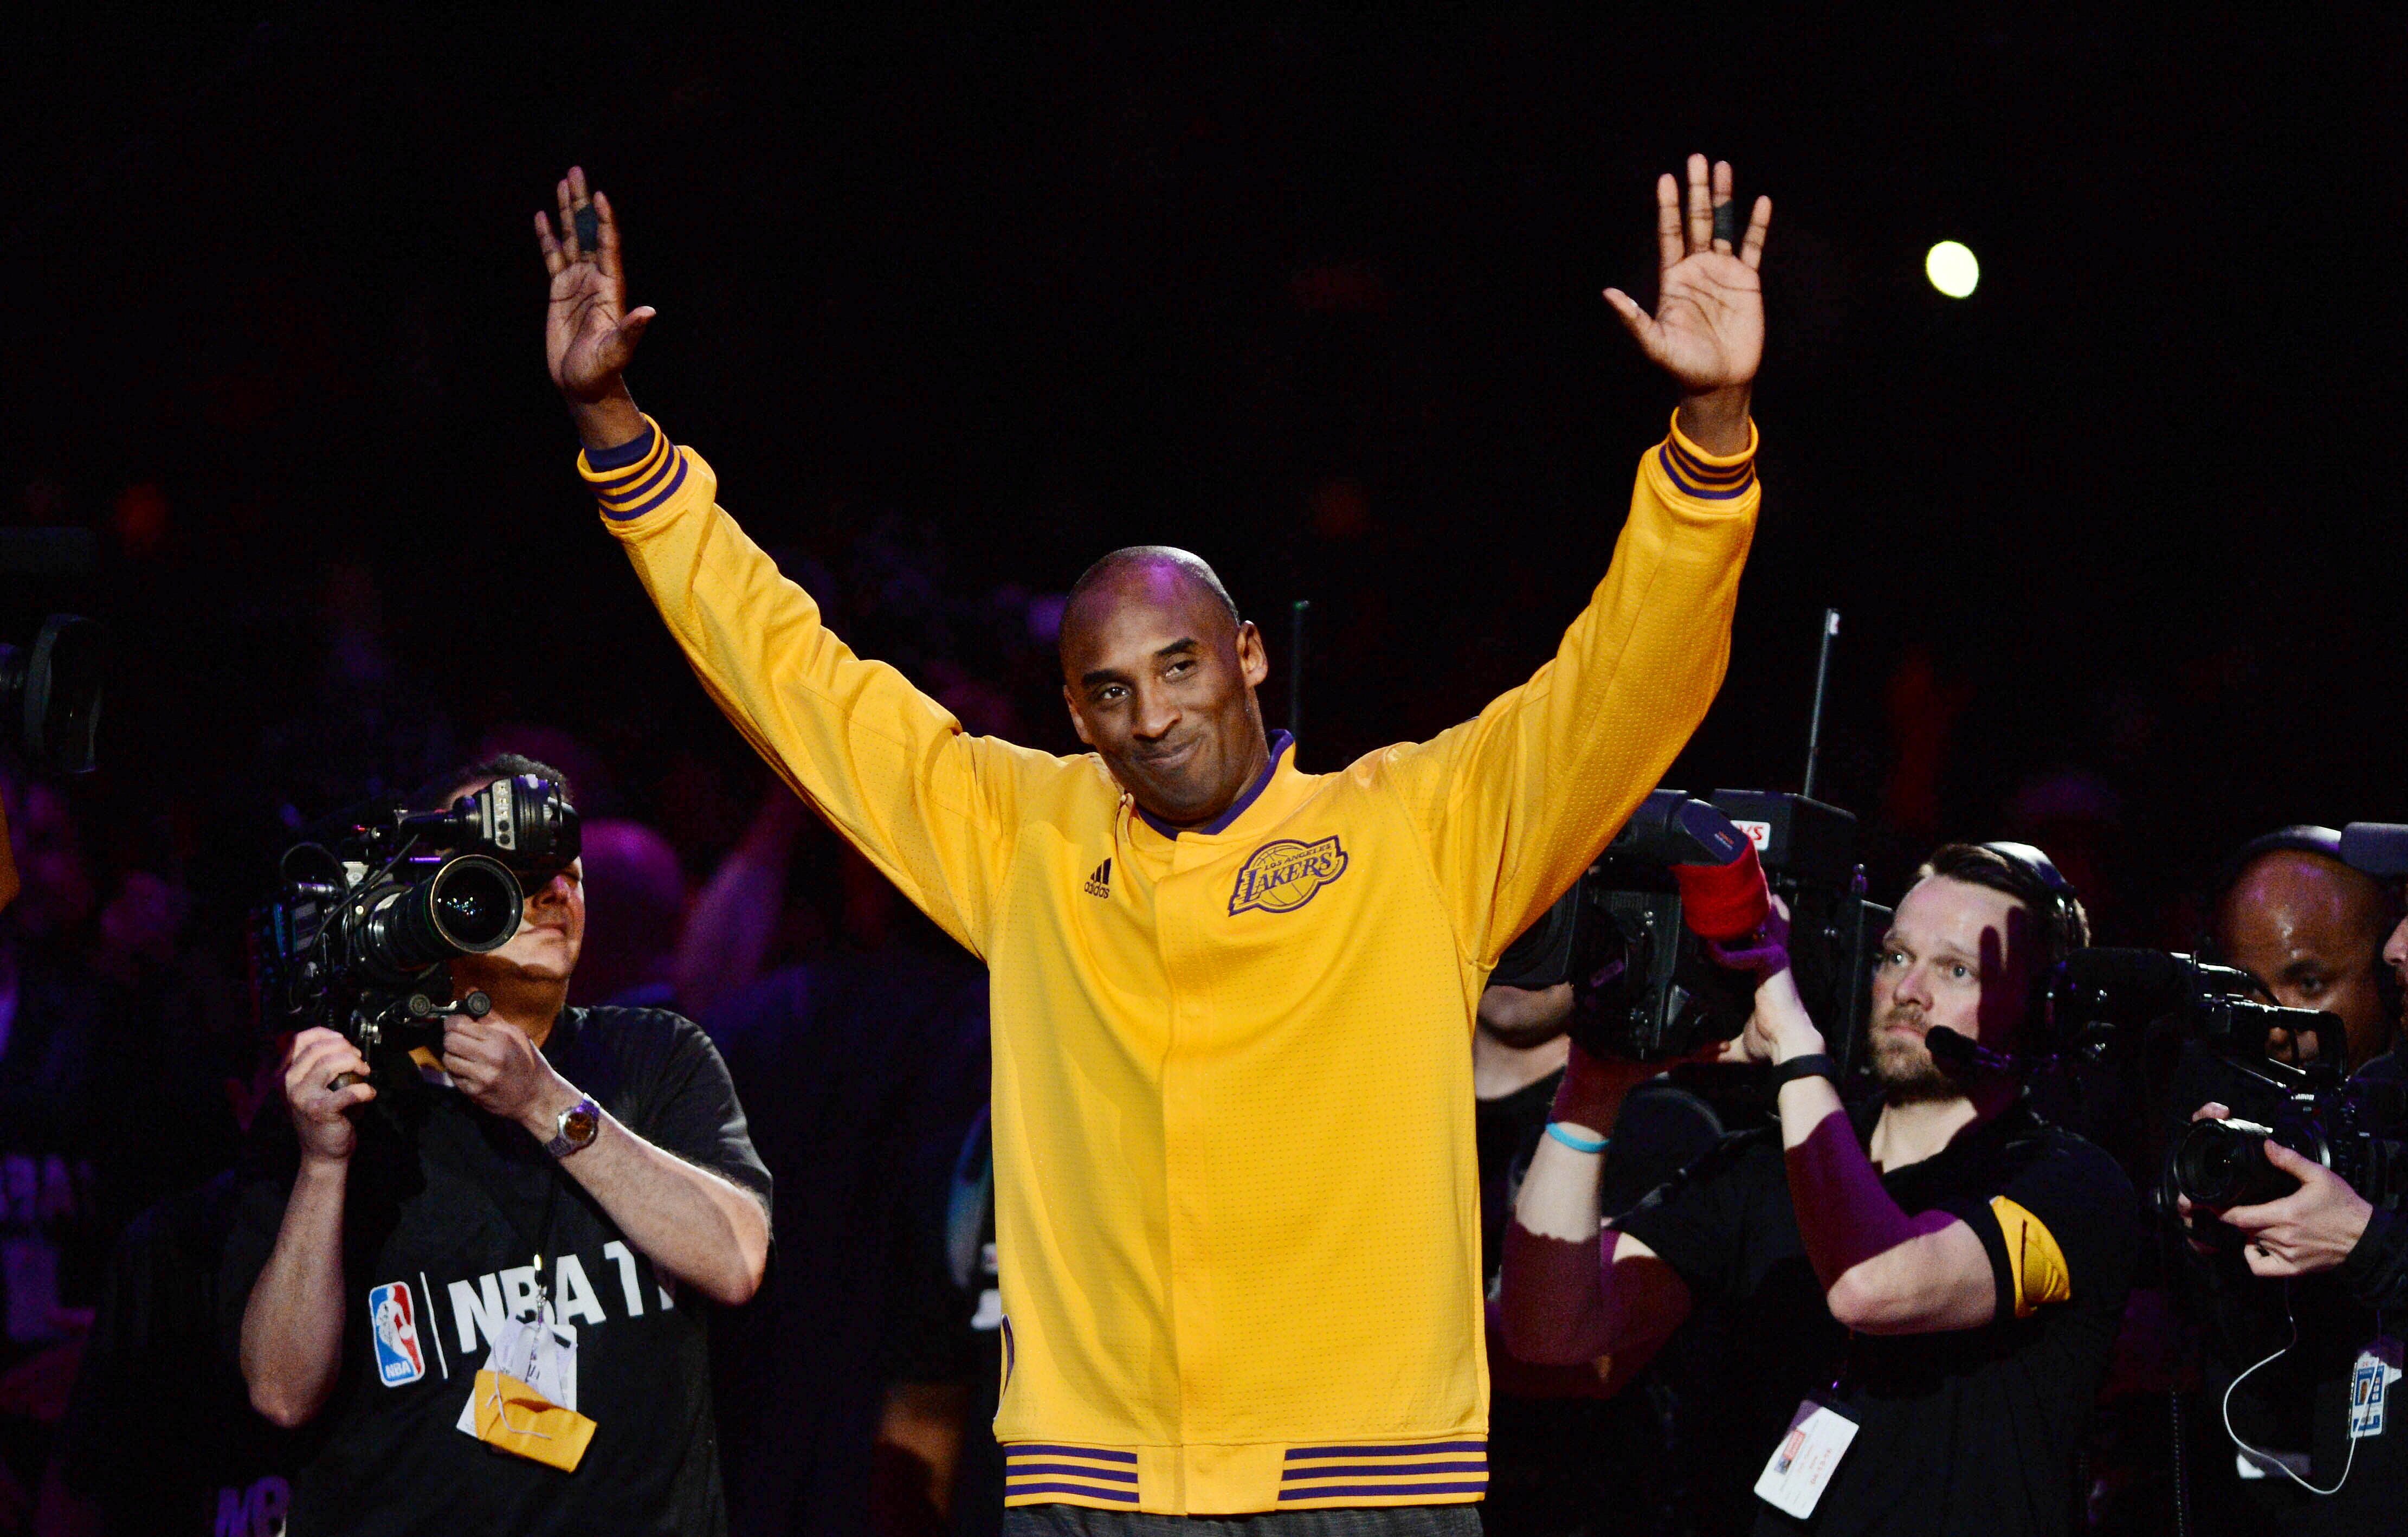 Nike, Vanessa Bryant reach deal to continue making Kobe Bryant’s signature shoe